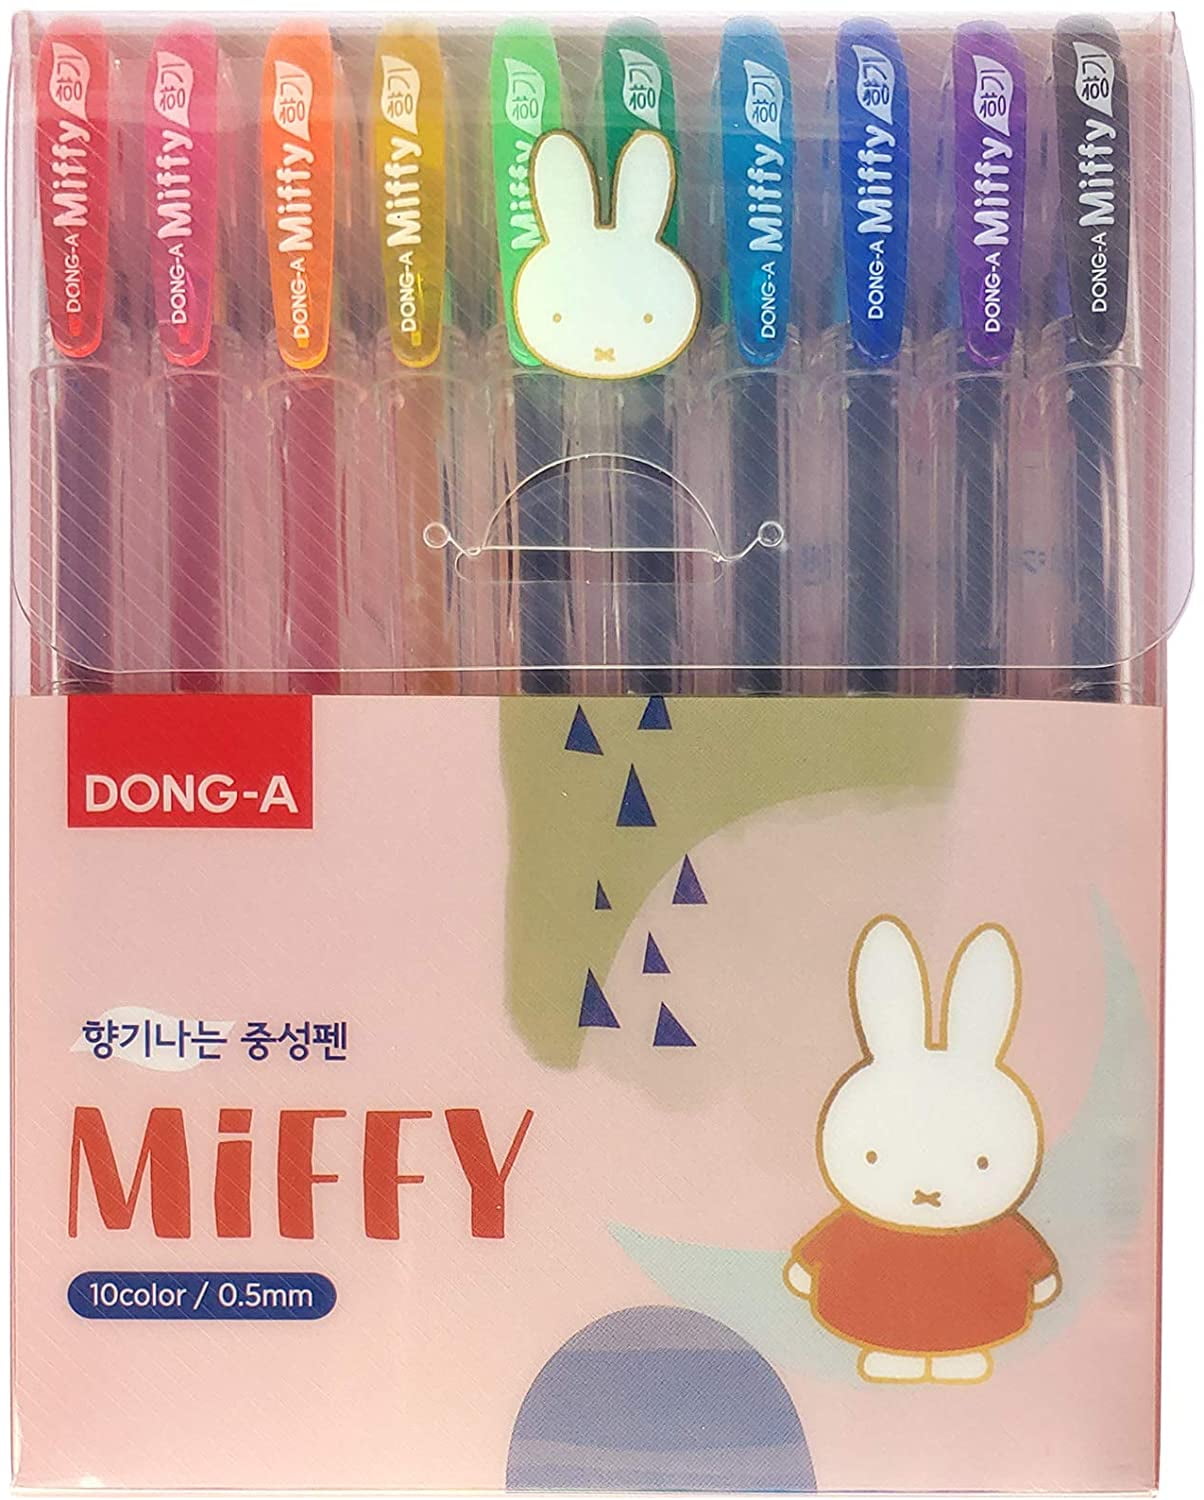 Blue 0.5mm Pack of 12 DONG-A Miffy Bunny Gel Ink Roller Ball Pens